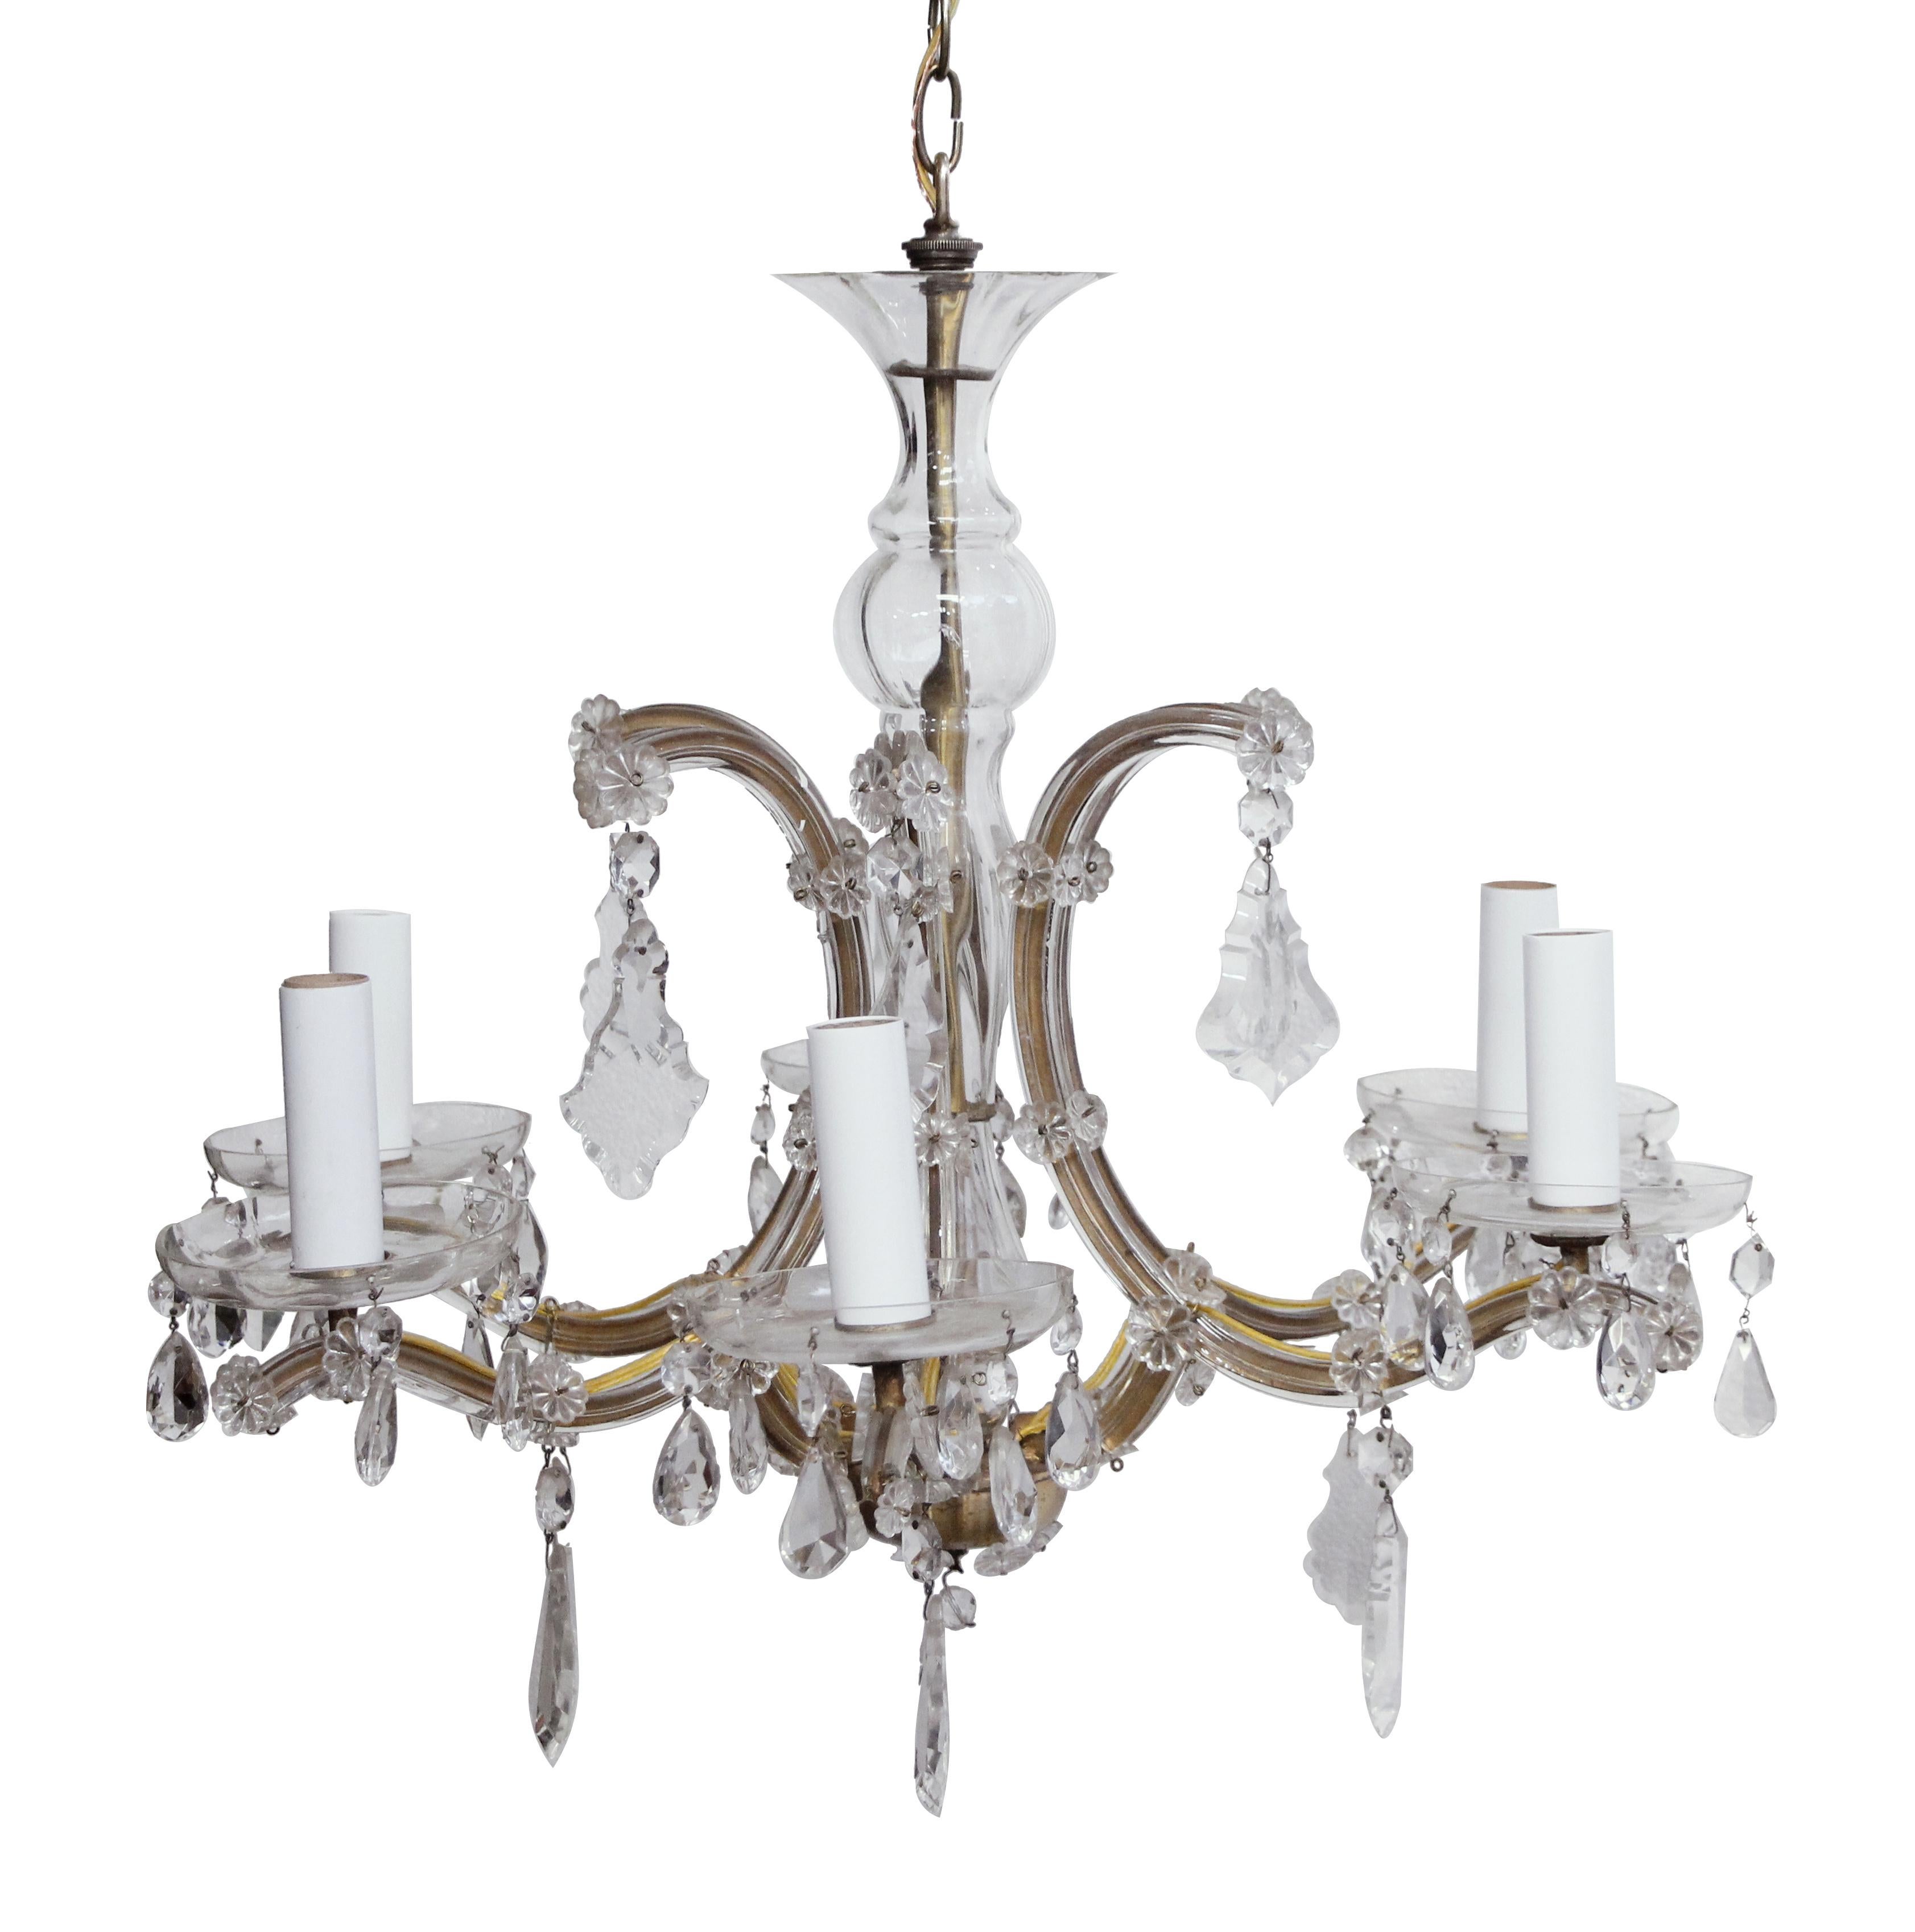 Clear crystal Marie Therese style chandelier with six arms from the 1940s. Please note, this item is located in our Los Angeles location.
